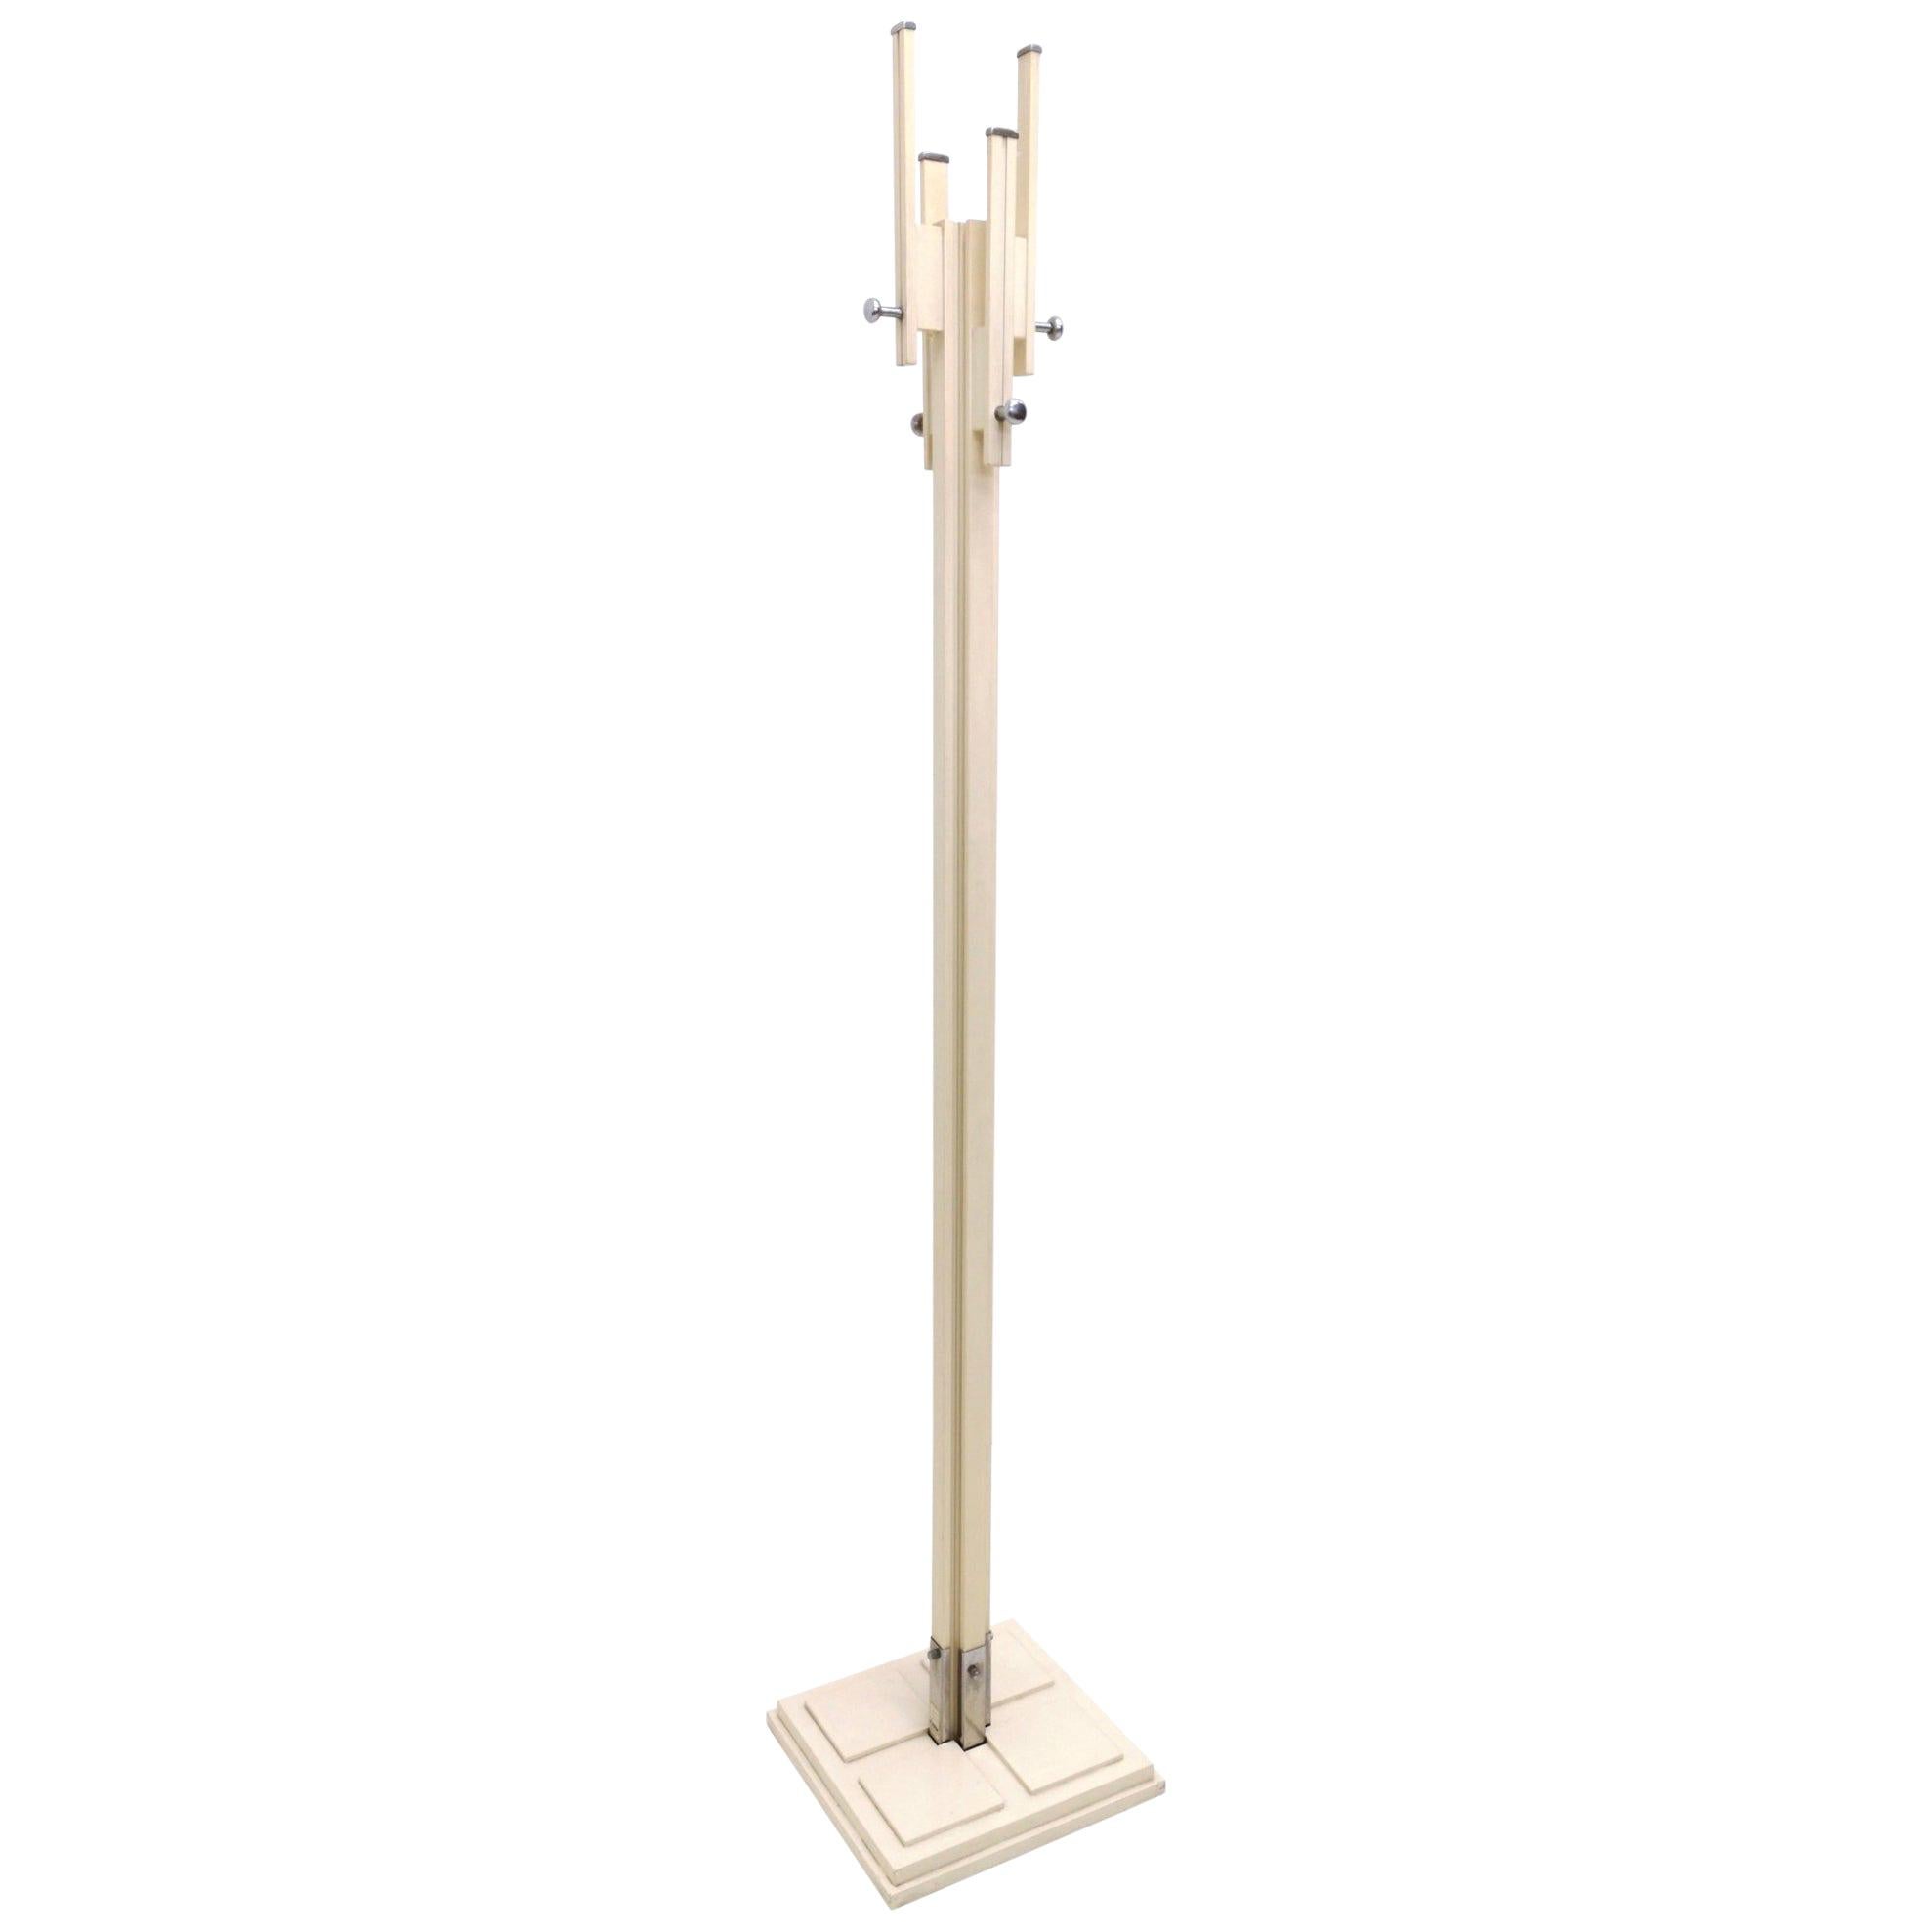 Ivory Lacquered Wood Coat Rack by Carlo de Carli for Fiarm, Italy